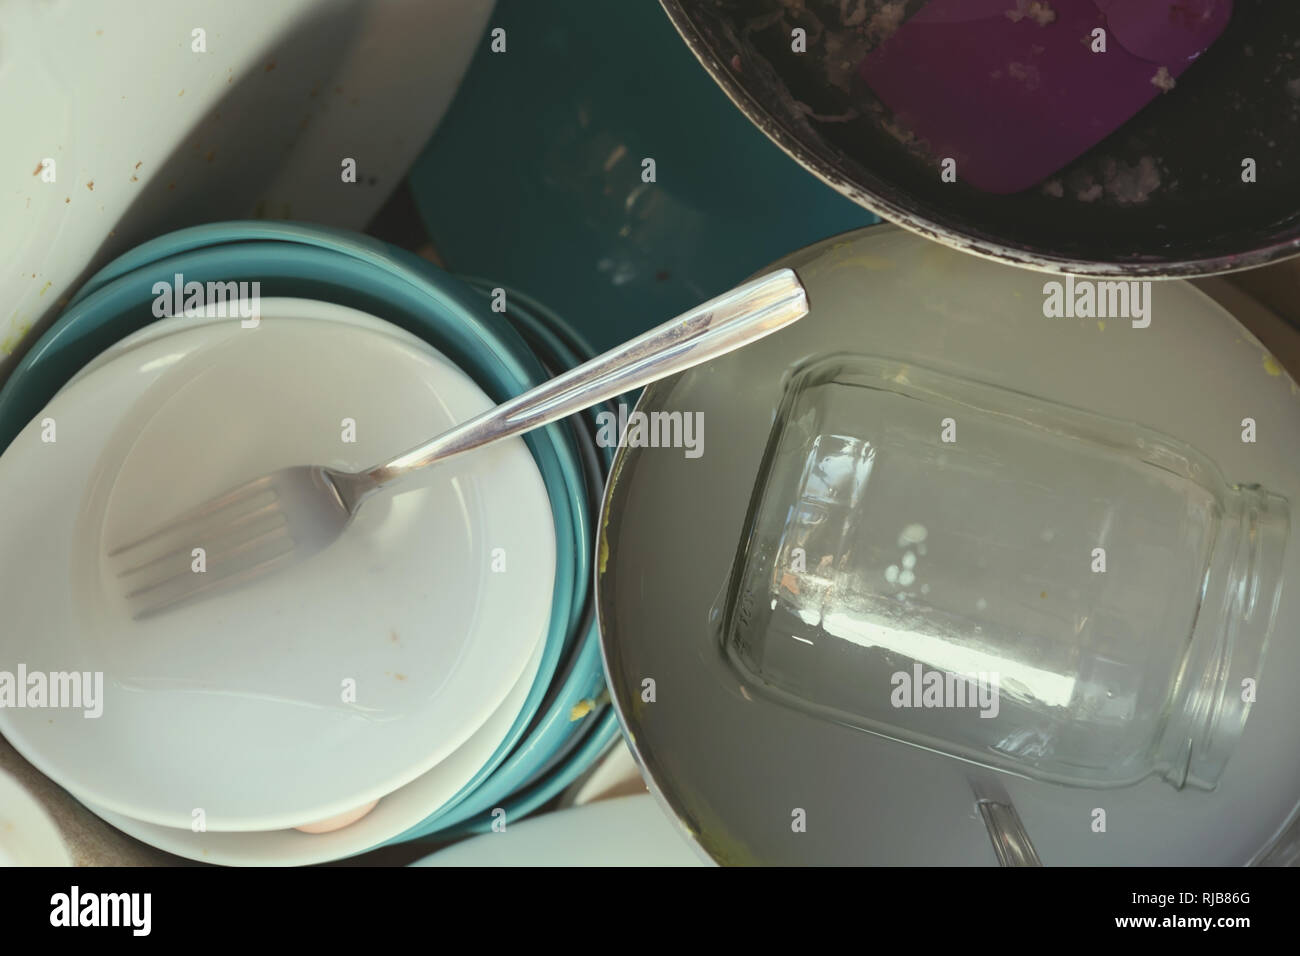 A Messy Pile of Dirty Dishes And Utensils In Kitchen Sink Stock Photo